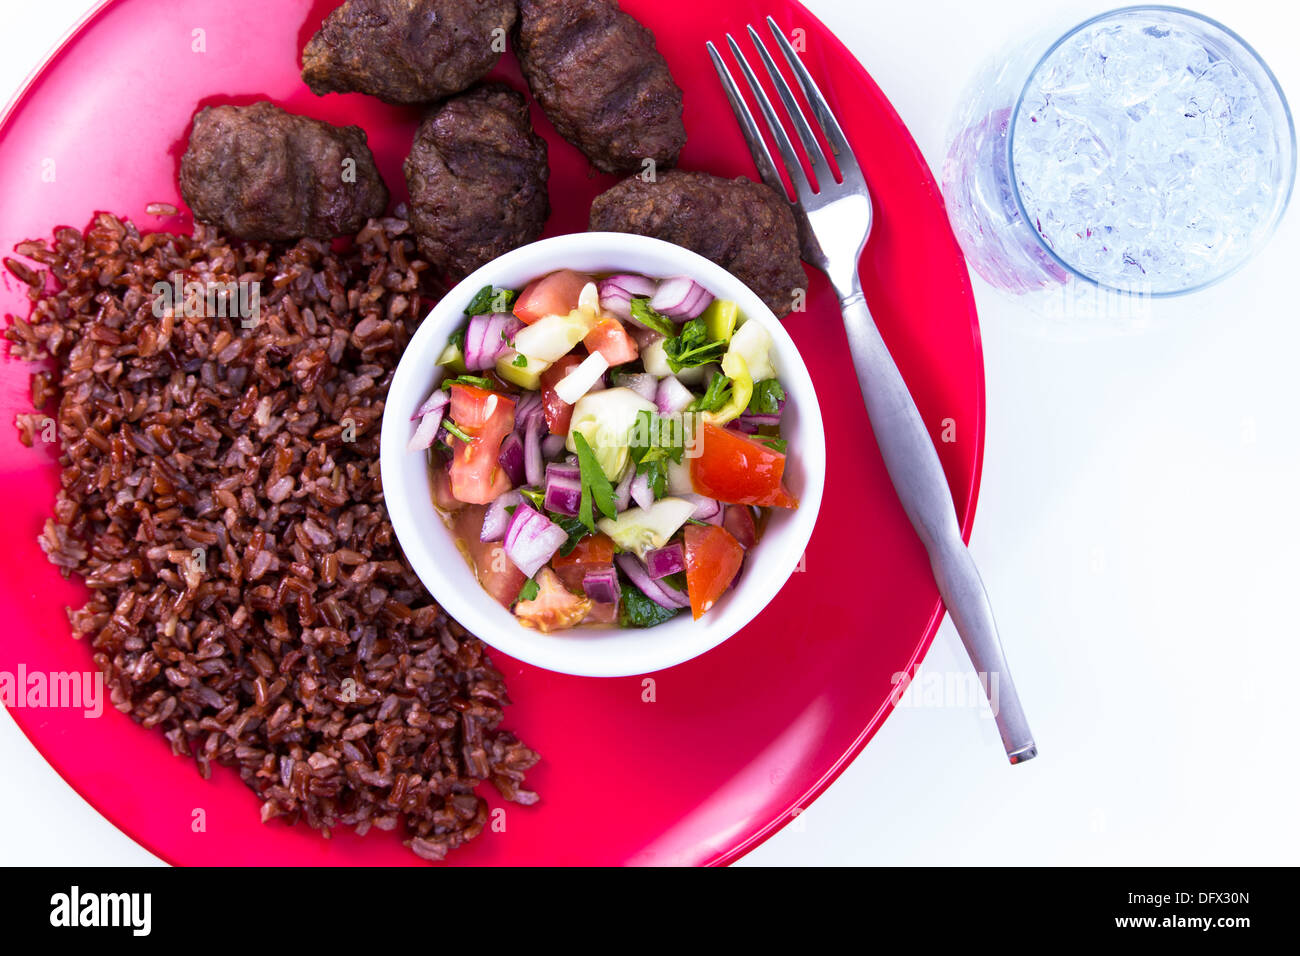 Turkish Meat Balls Kofte served with Red Rice Pilaf and Turkish Shepperd Salad on a red plate along with ice water. Isolated on Stock Photo